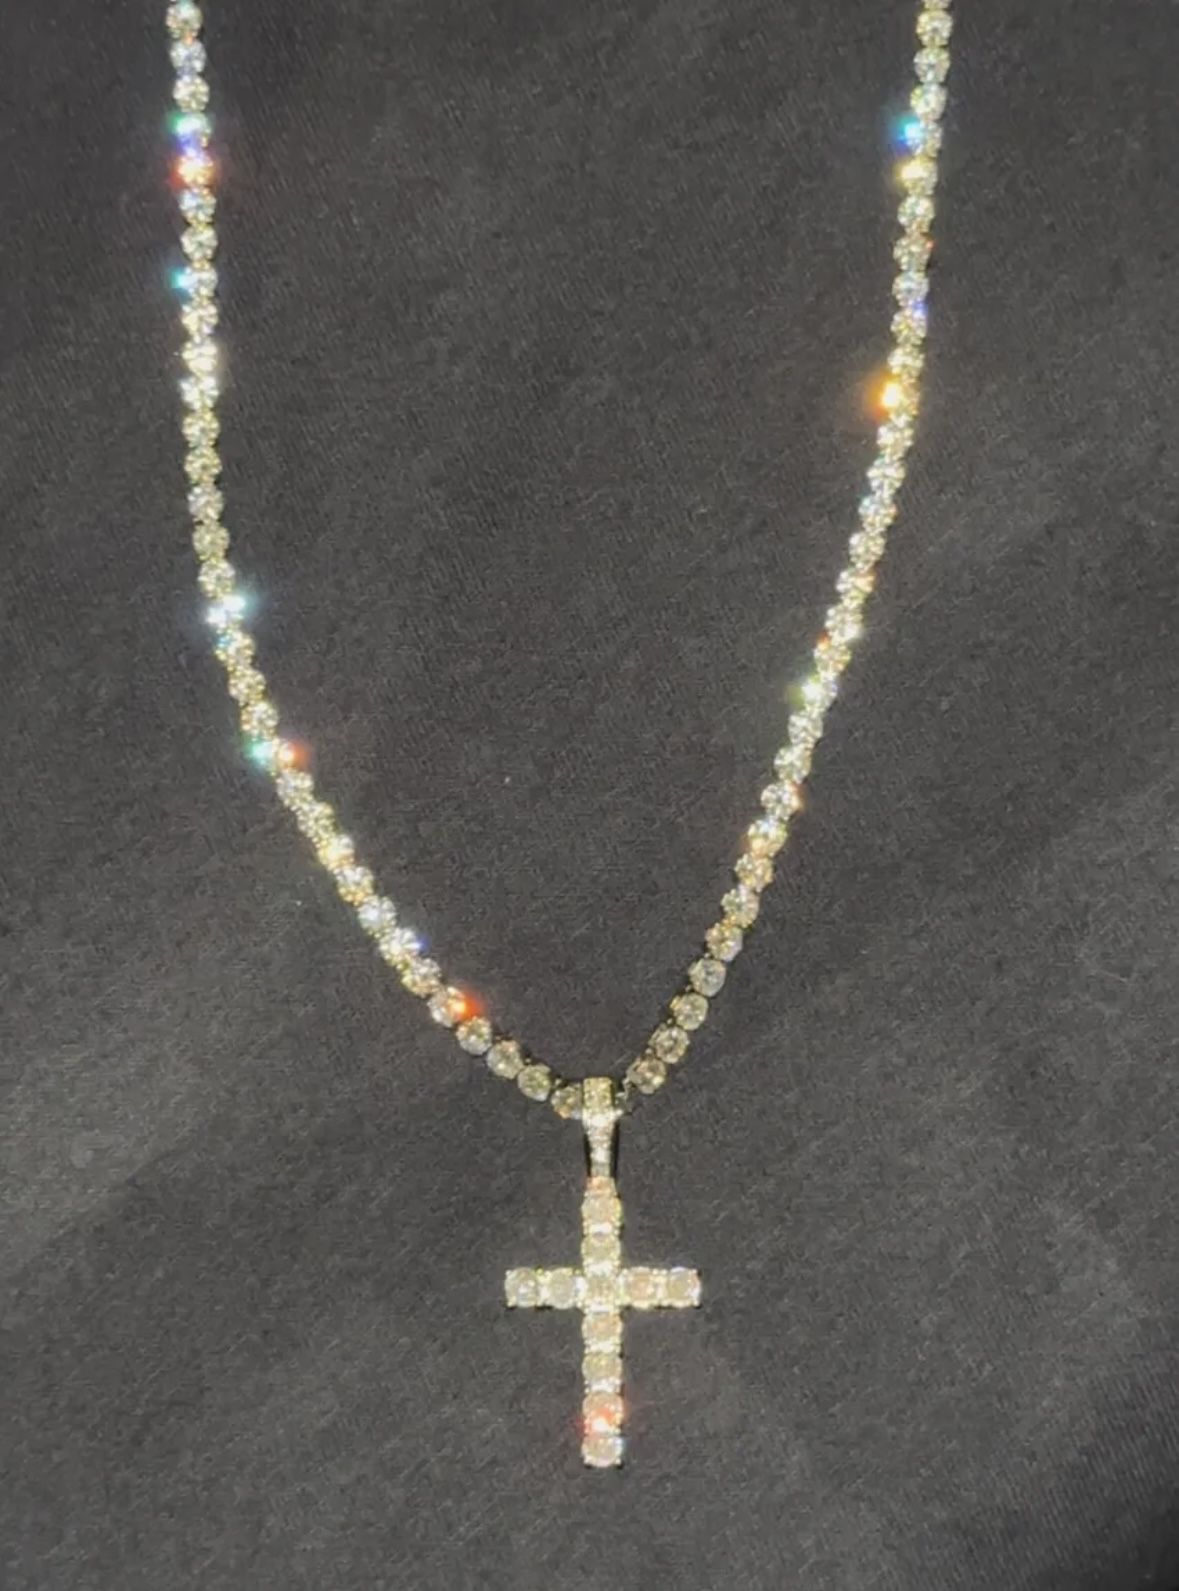 Iced Out Cross Necklace With 4mm Cubic Zirconia Tennis Chain